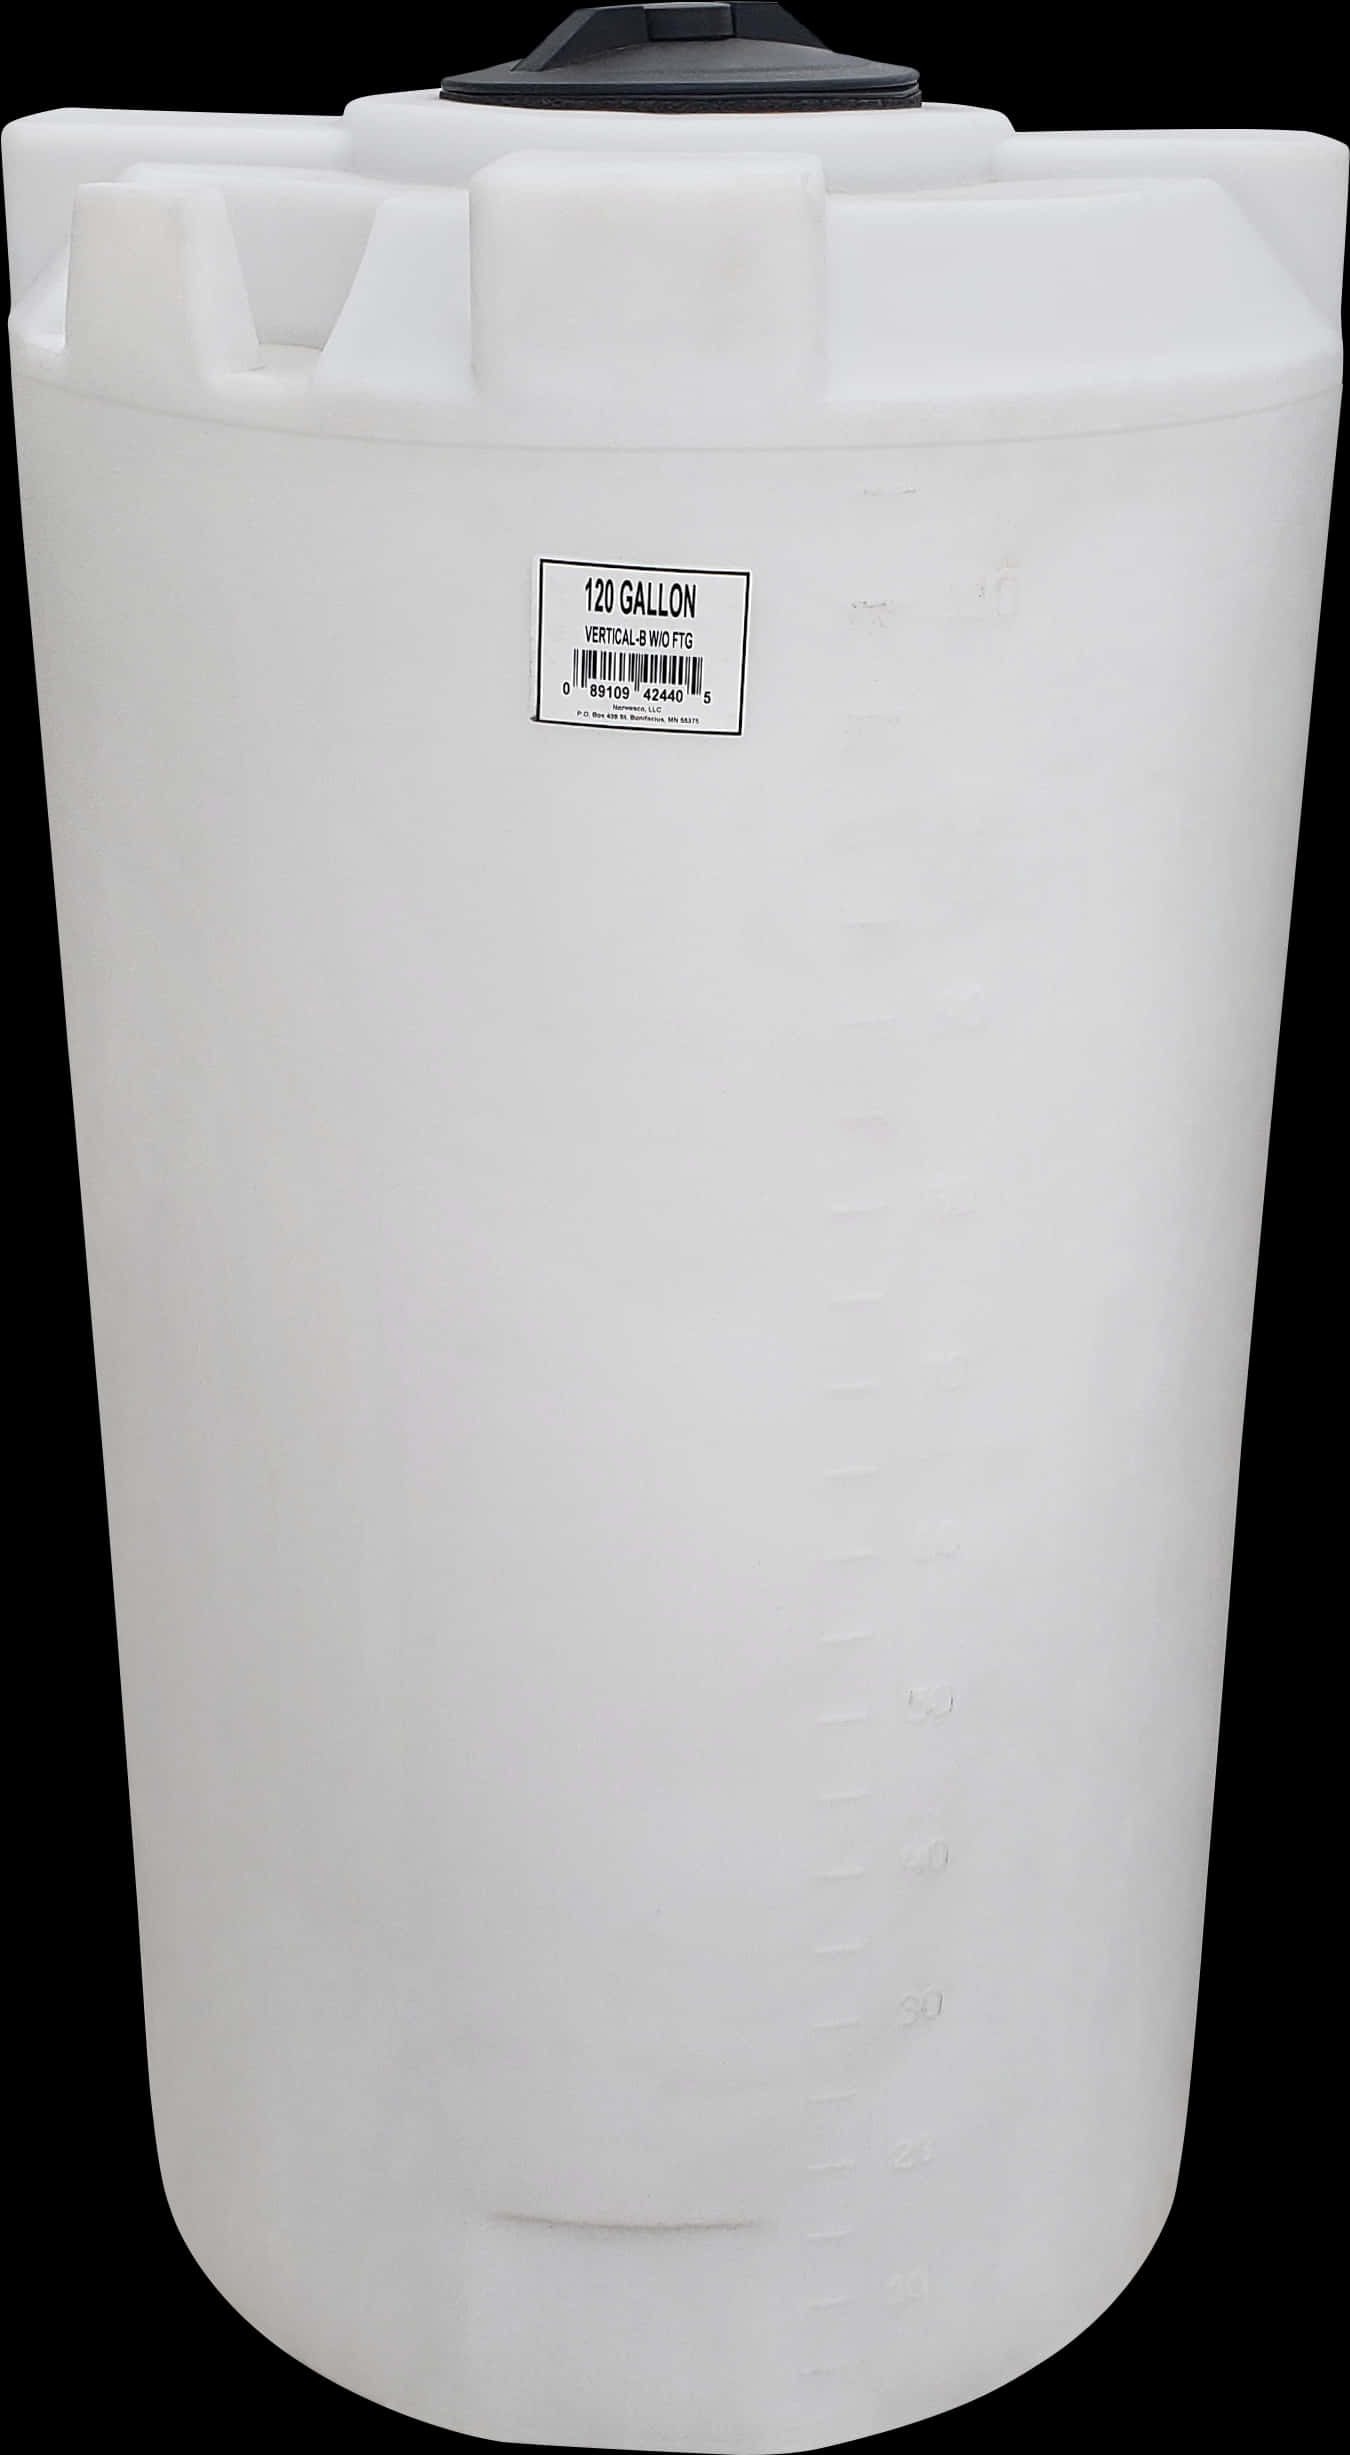 A White Container With A Label